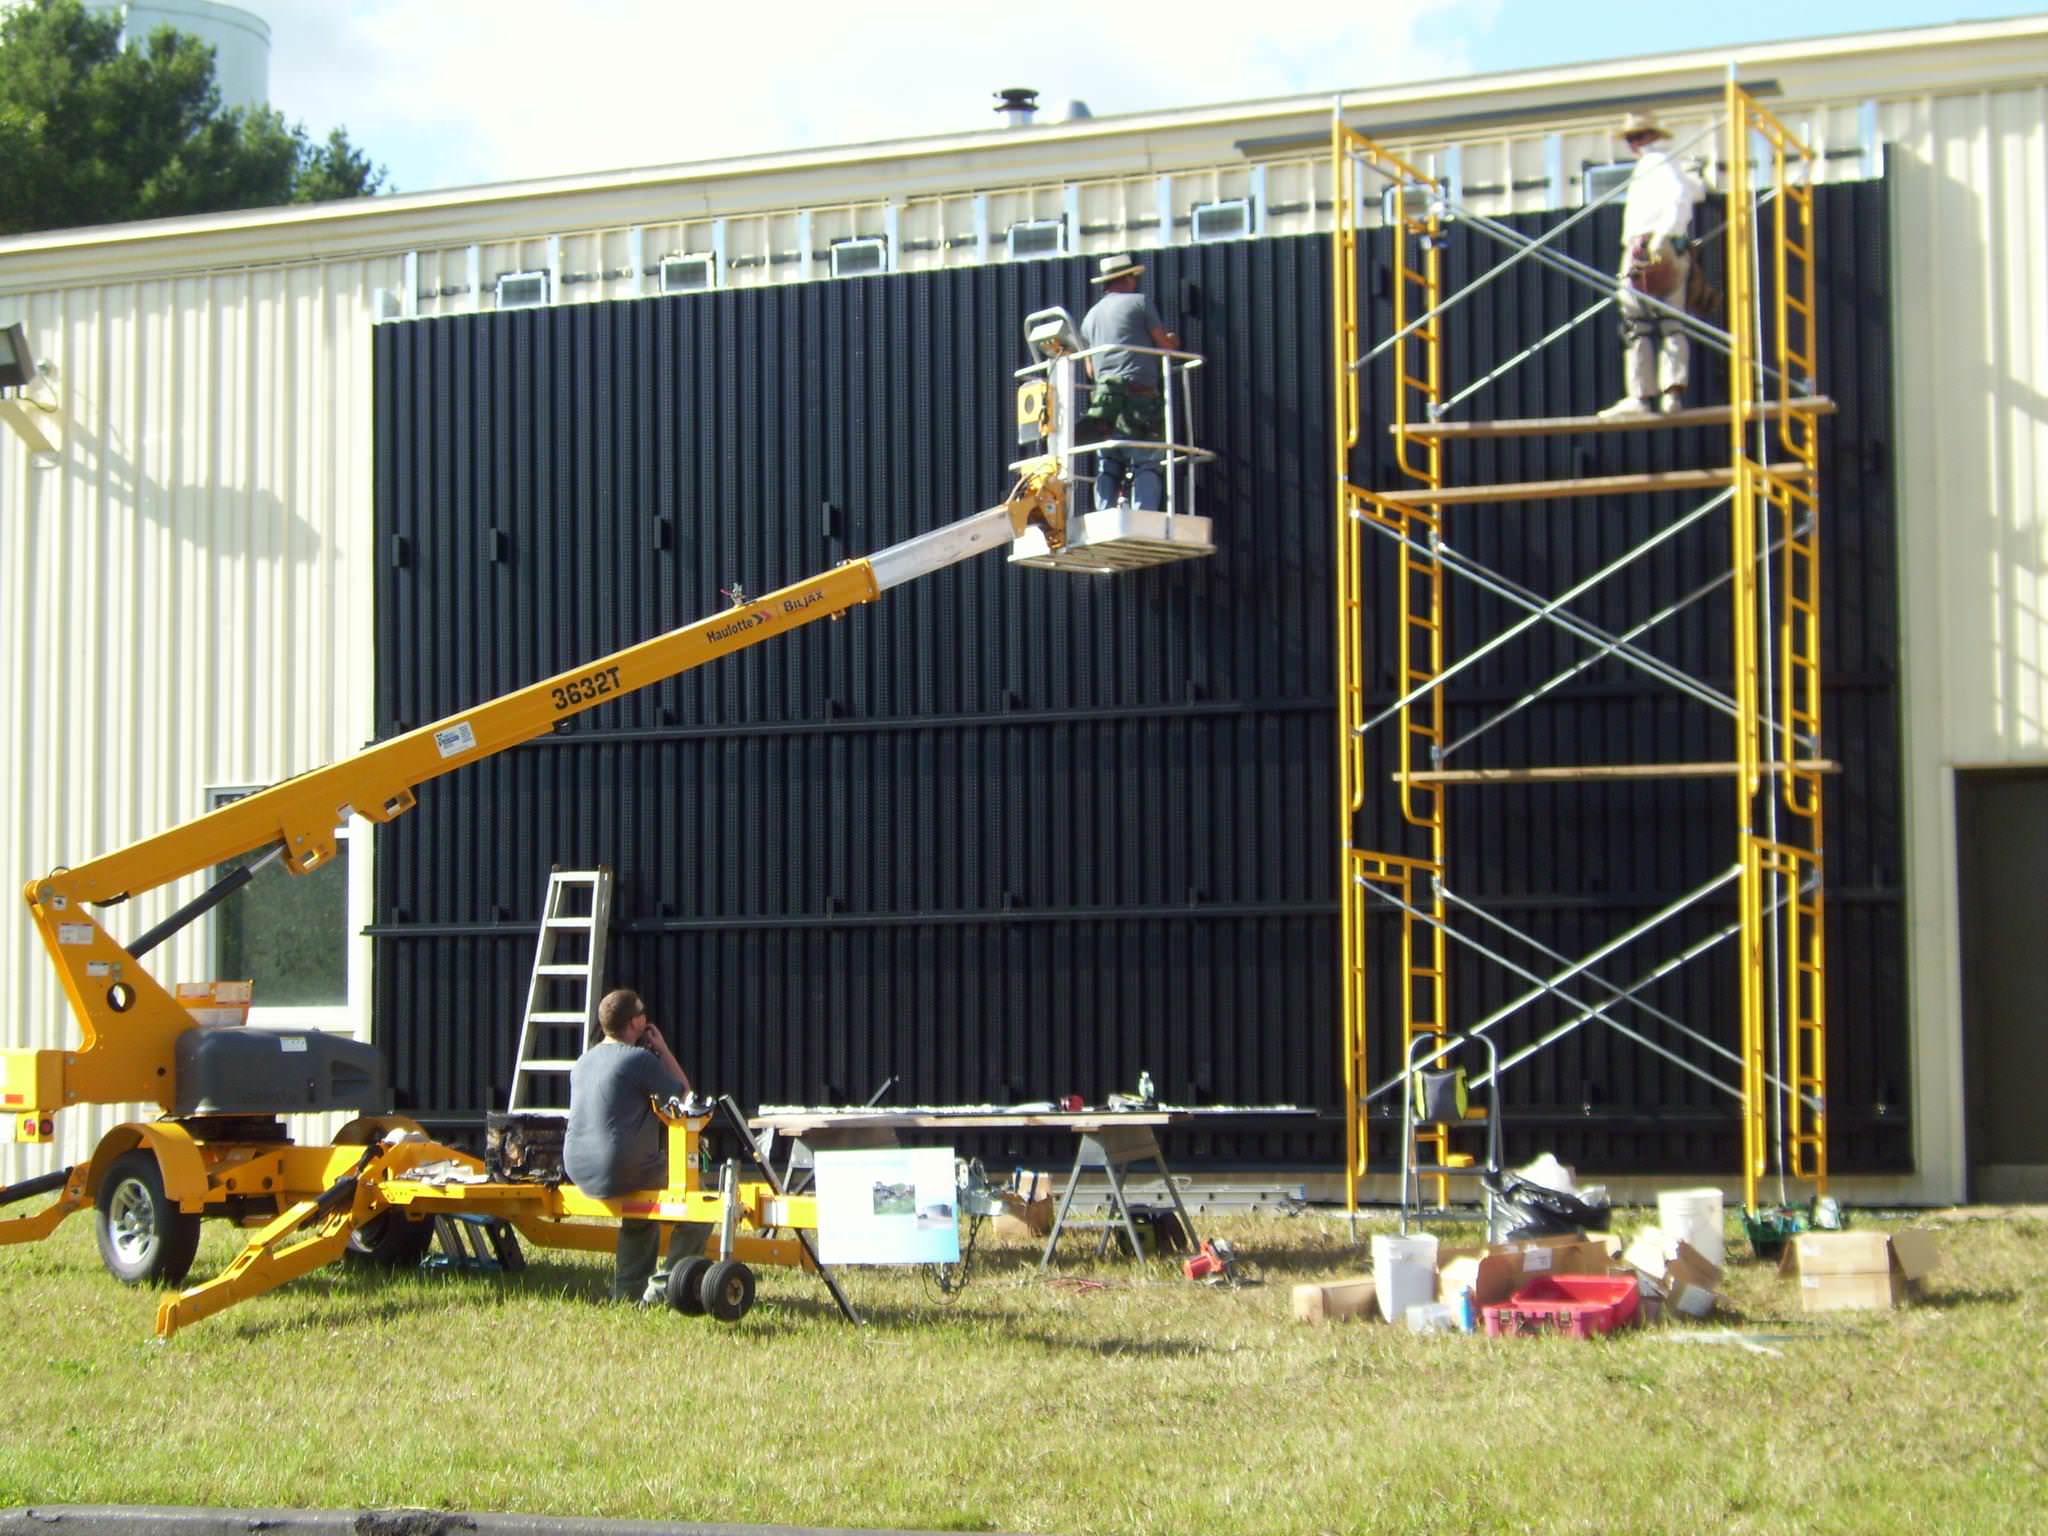 The installation of a solar wall at Wicked Joe's roastery in Maine.